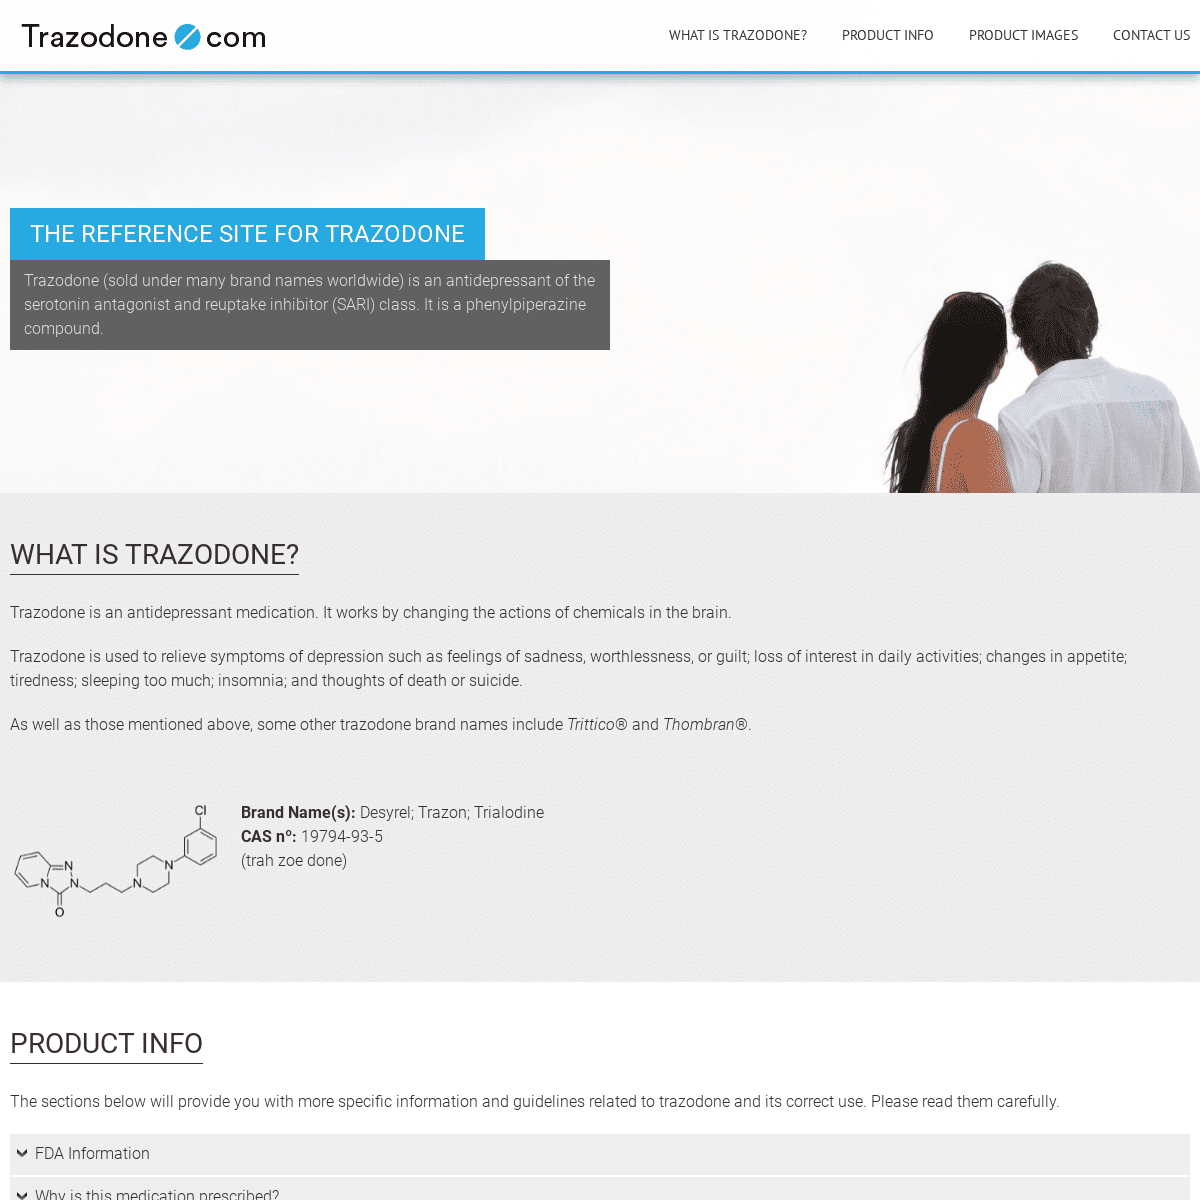 A complete backup of https://trazodone.com